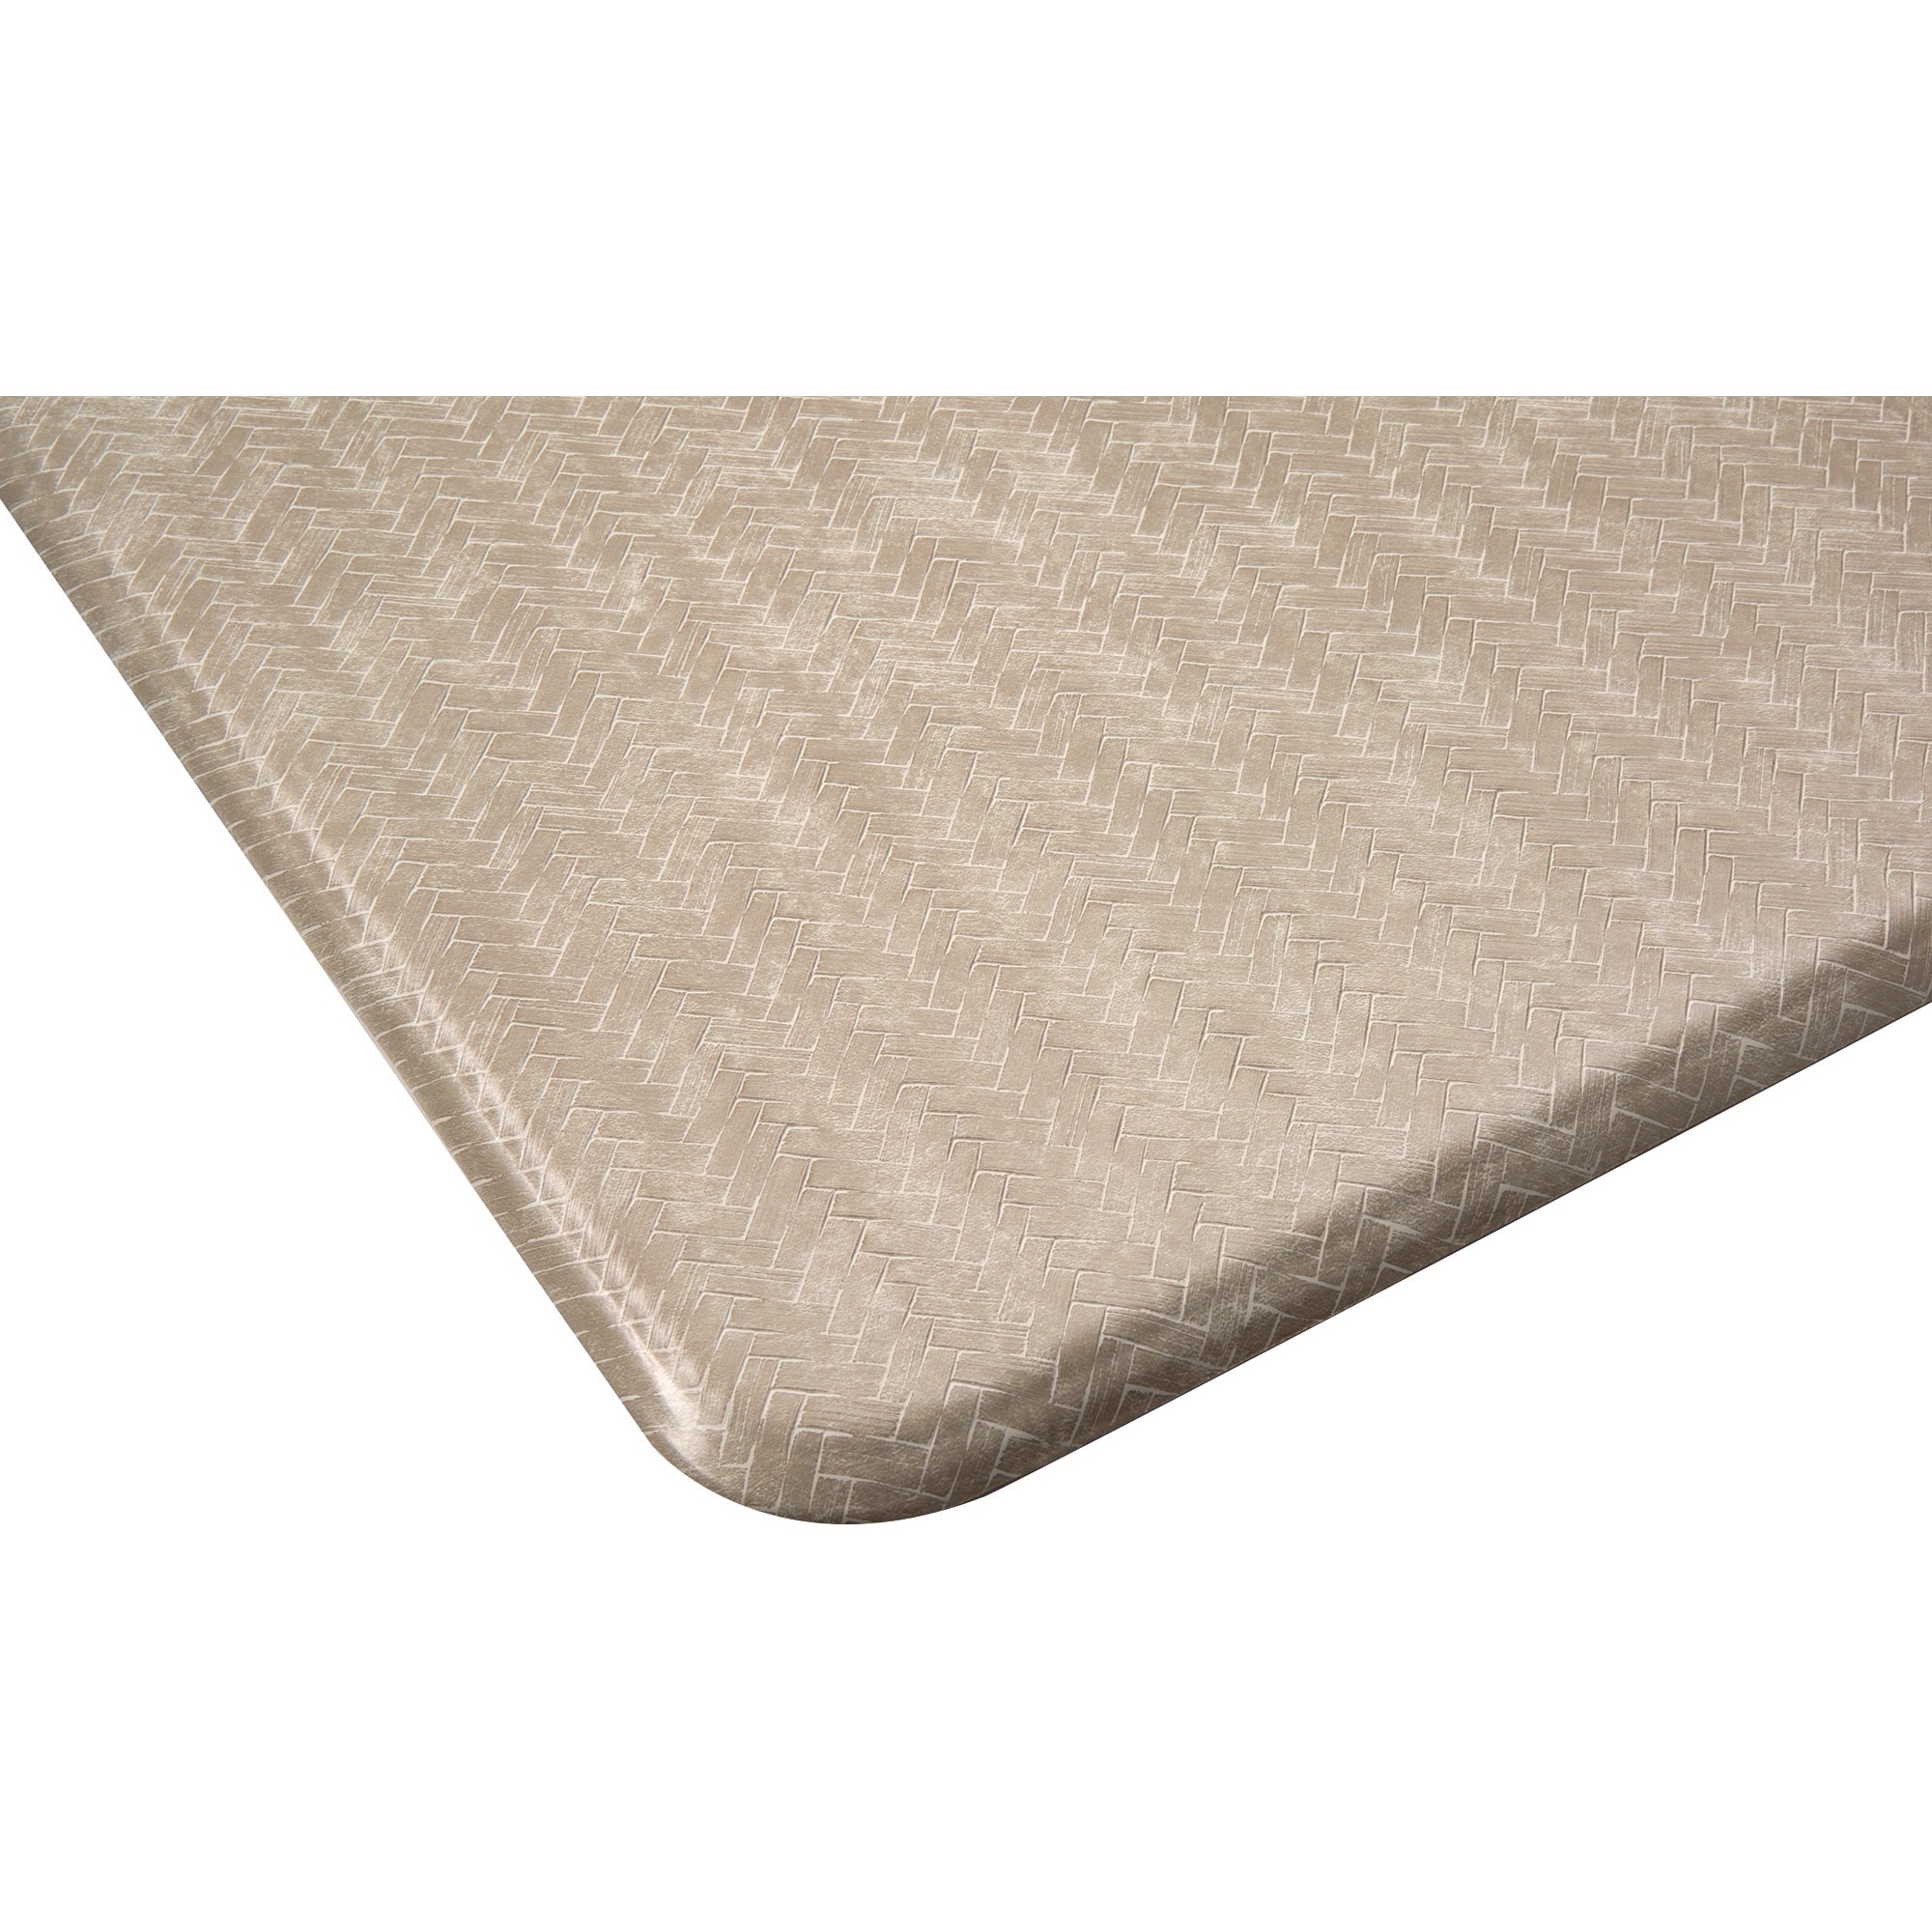 Imprint Comfort Mats For Body And Sole With Cushion Core 20” X 30” X 3/4”